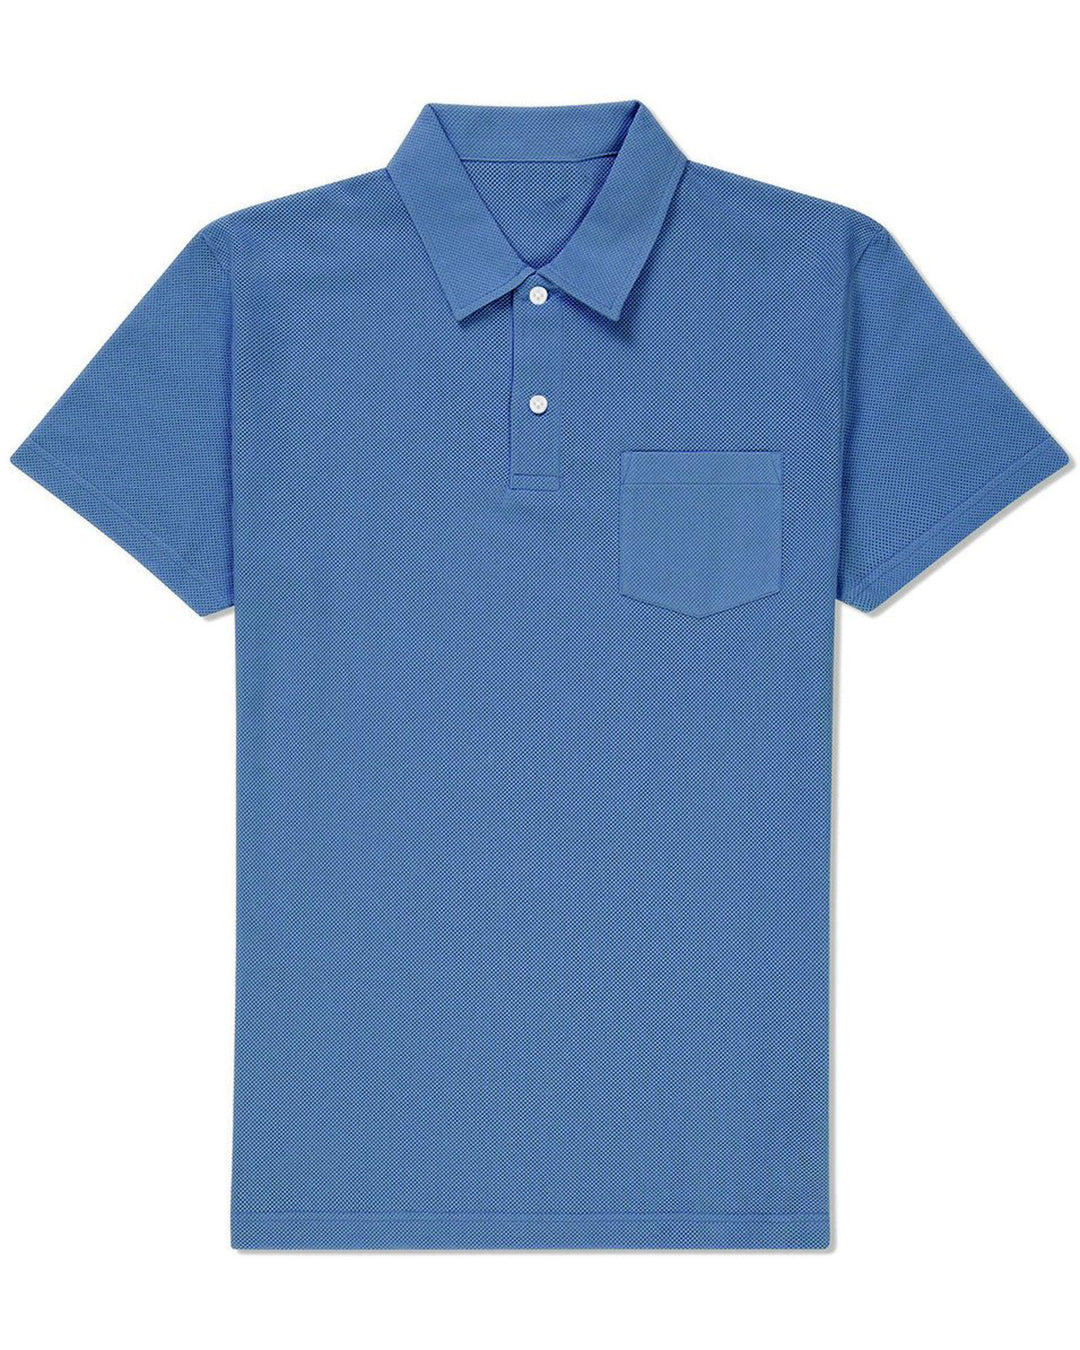 Front of the custom oxford polo shirt for men by Luxire in steel blue